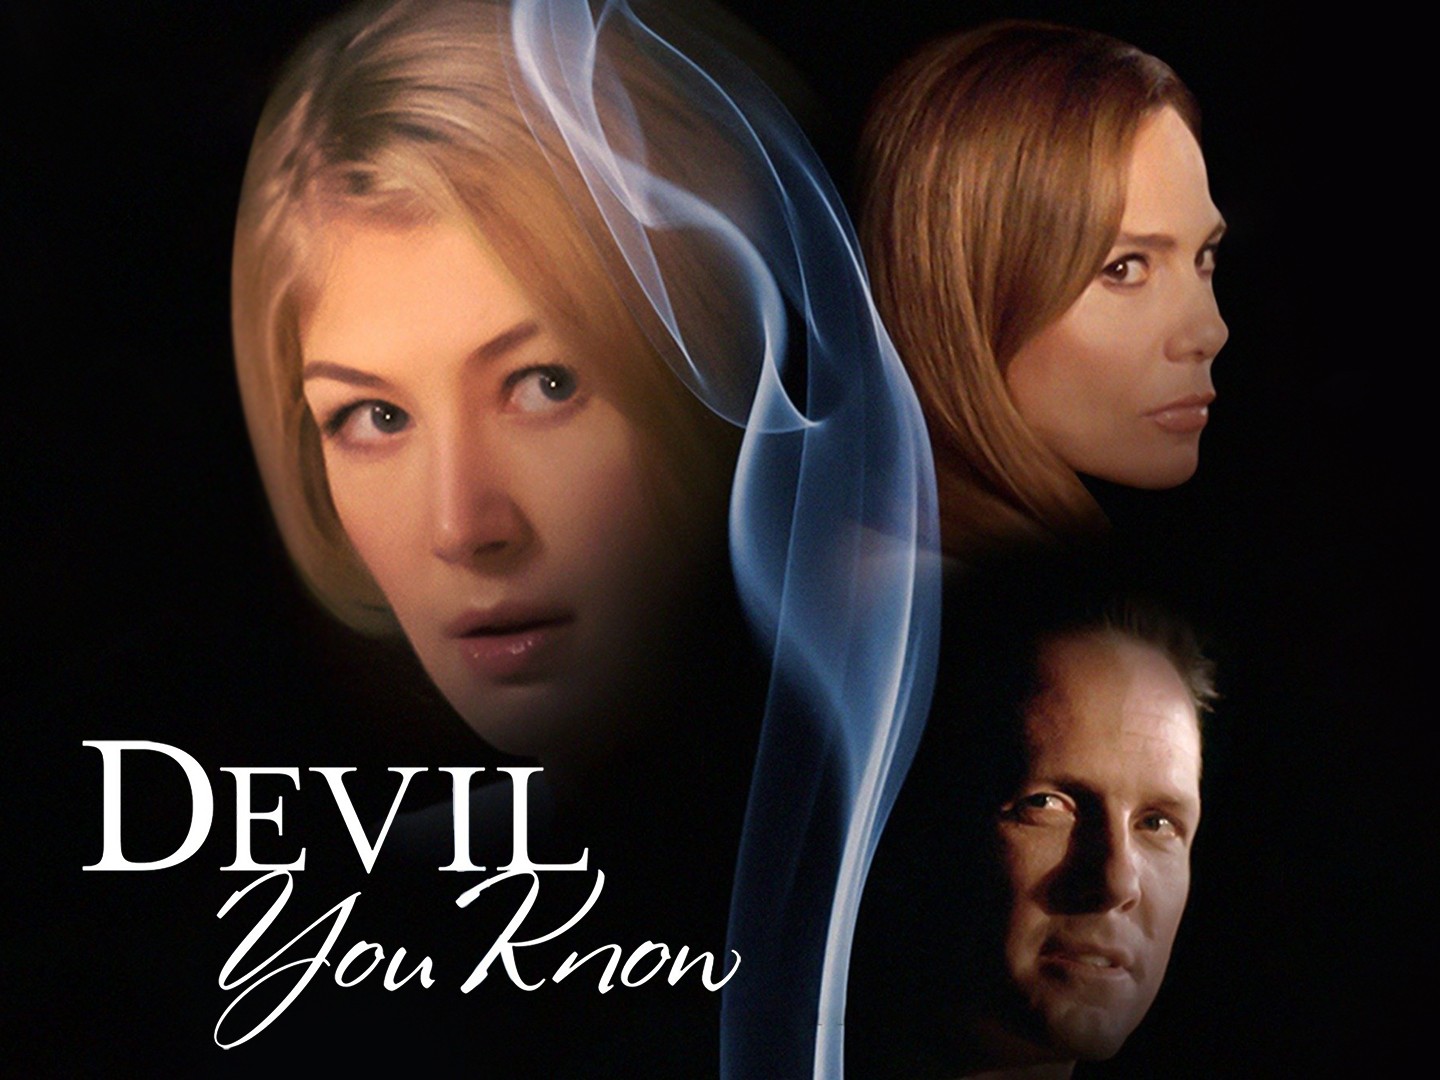 Watch Betrayed Season 1 Episode 2 - The Devil You Know Online Now